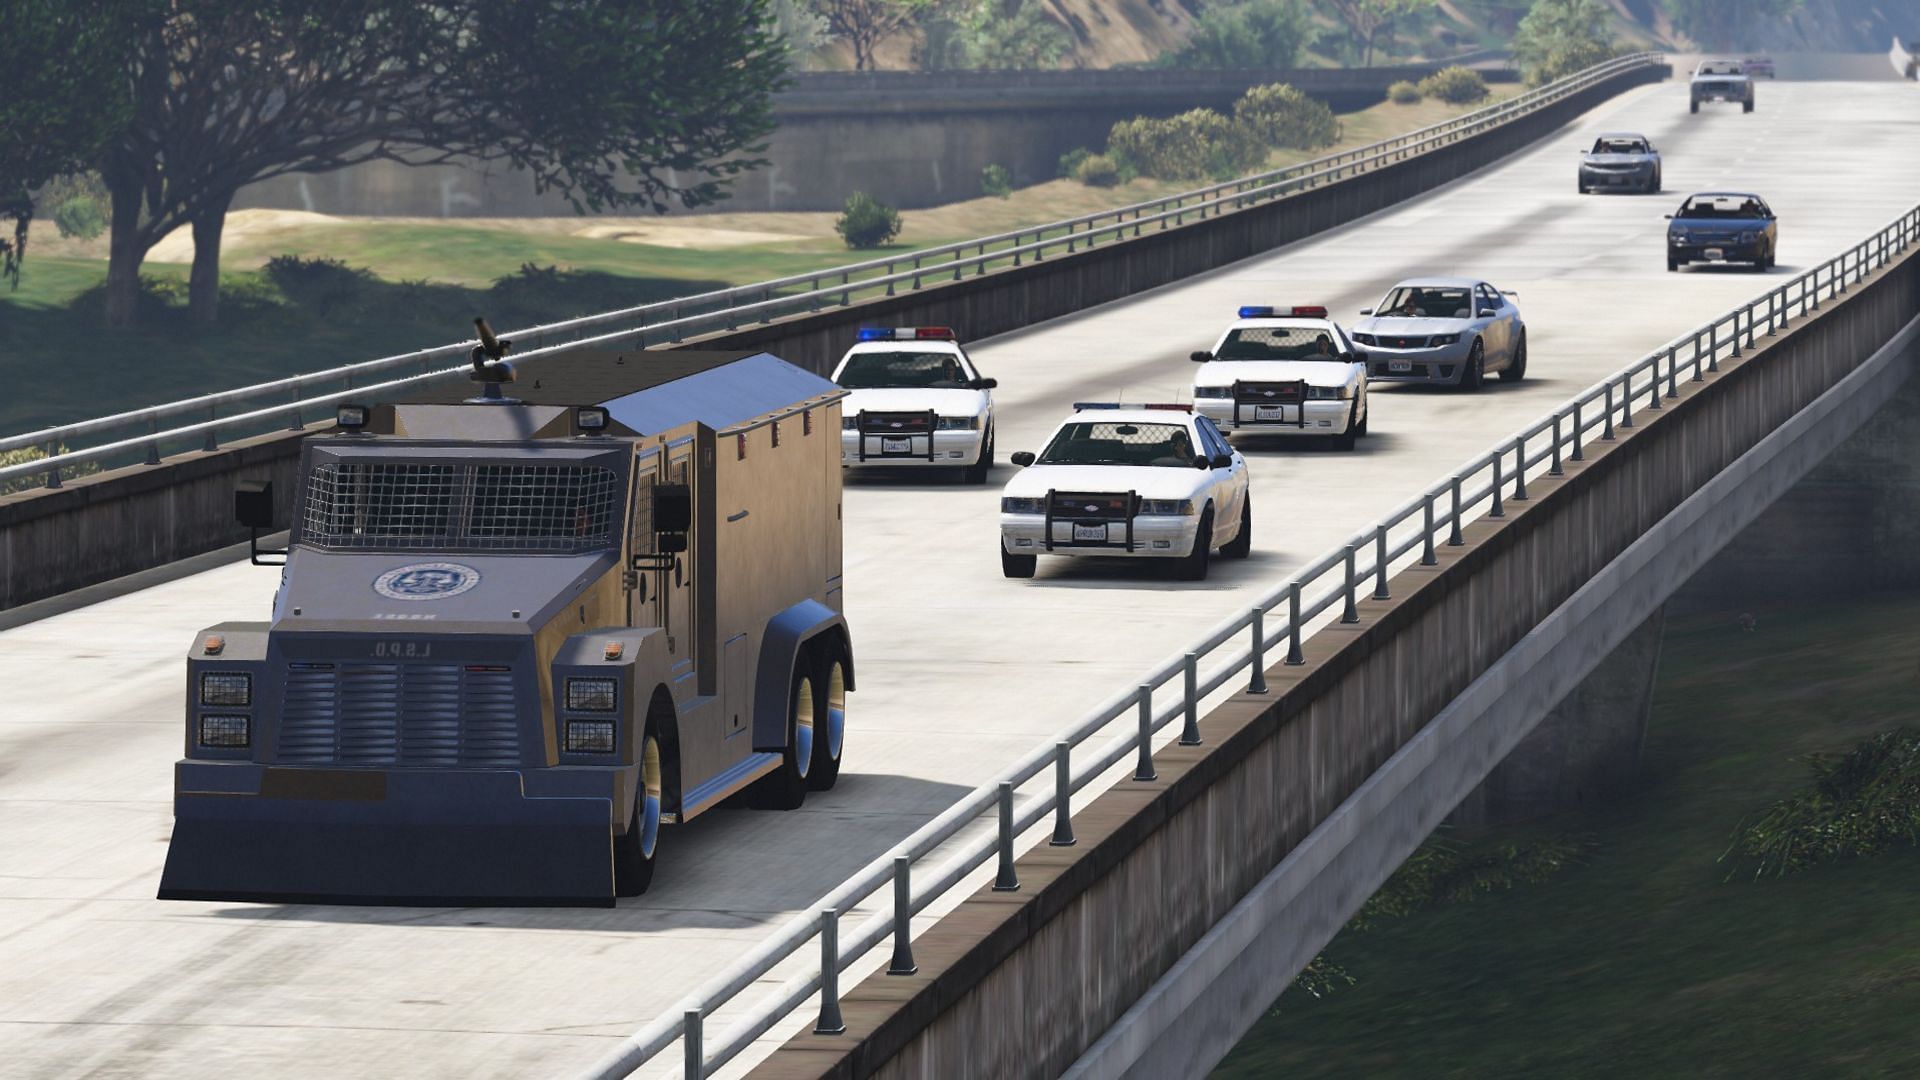 This is a great mod that makes the game&#039;s world feel more lively. (Image via gta5-mods/Eddlm)